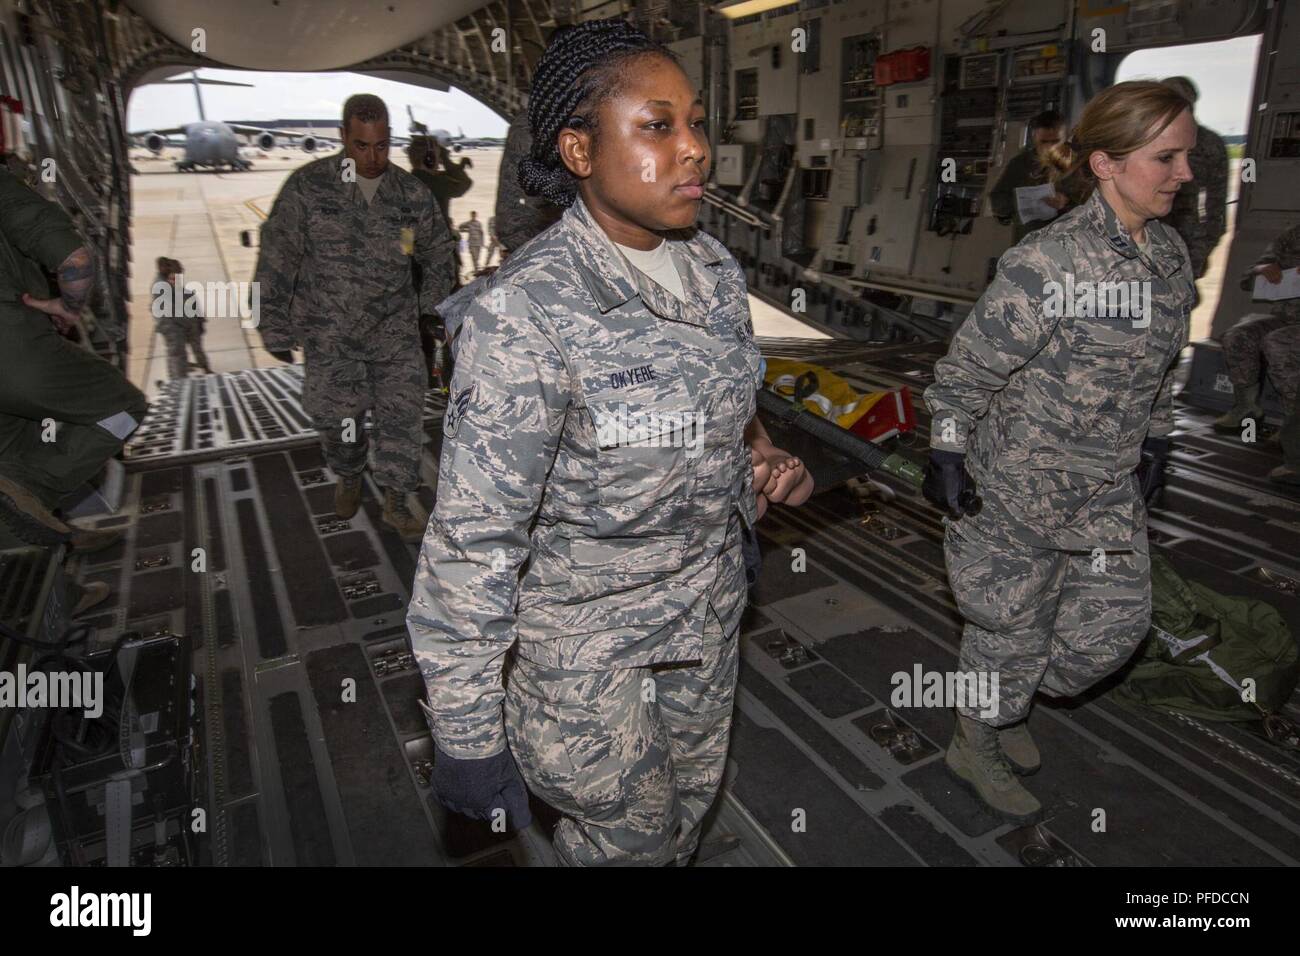 U.S. Air Force Senior Airman Selina N. Okyere, center, 514th Aeromedical Evacuation Squadron, and Capt. Kelly M. Wanamaker, 514th Aeromedical Staging Squadron, both with the 514th Air Mobility Wing, participate in a patient loading exercise at Joint Base McGuire-Dix-Lakehurst, N.J., June 2, 2018. The 514th is an Air Force Reserve Command unit. Stock Photo